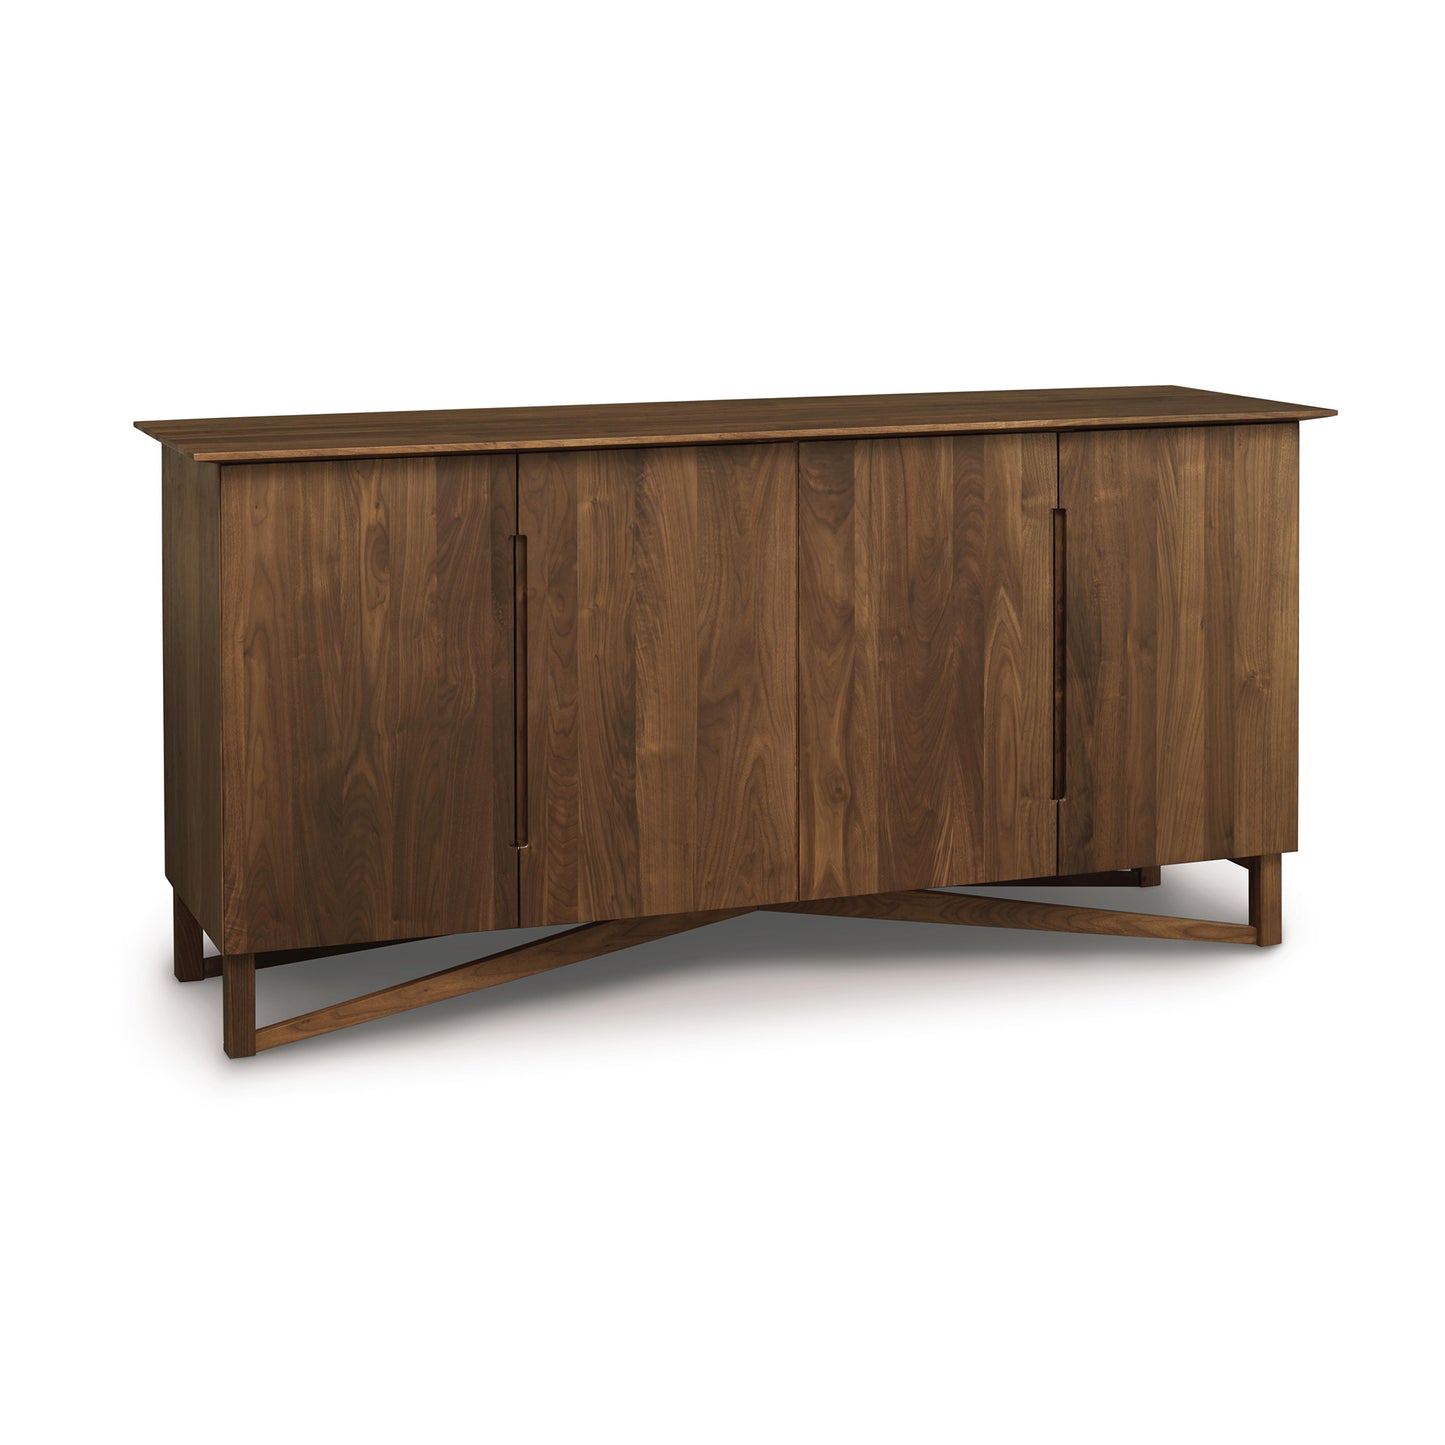 A solid natural hardwood Exeter Buffet from the Copeland Furniture Collection, with three doors and a flat top, placed against a white background.